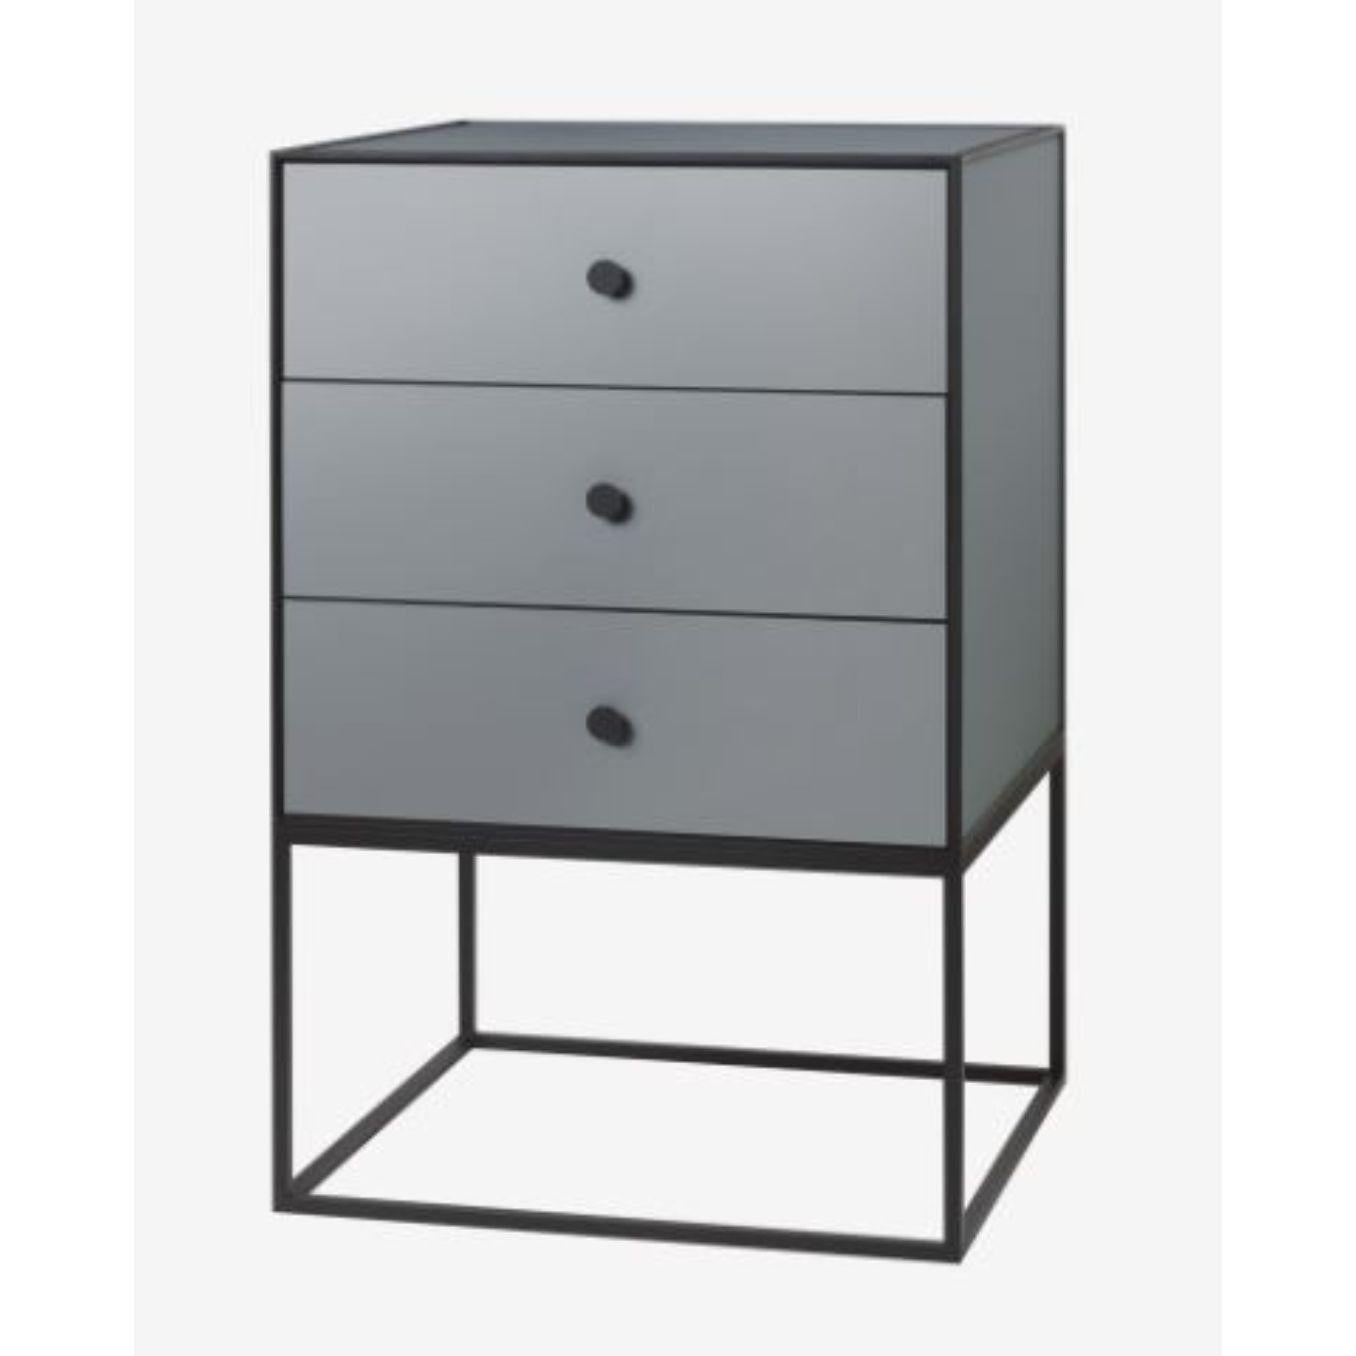 49 dark grey frame sideboard with 3-drawers by Lassen
Dimensions: d 49 x w 42 x h 77 cm 
Materials: Finér, Melamin, Melamine, Metal, Veneer
Also available in different colors and dimensions. 
Weight: 21 Kg

By Lassen is a Danish design brand